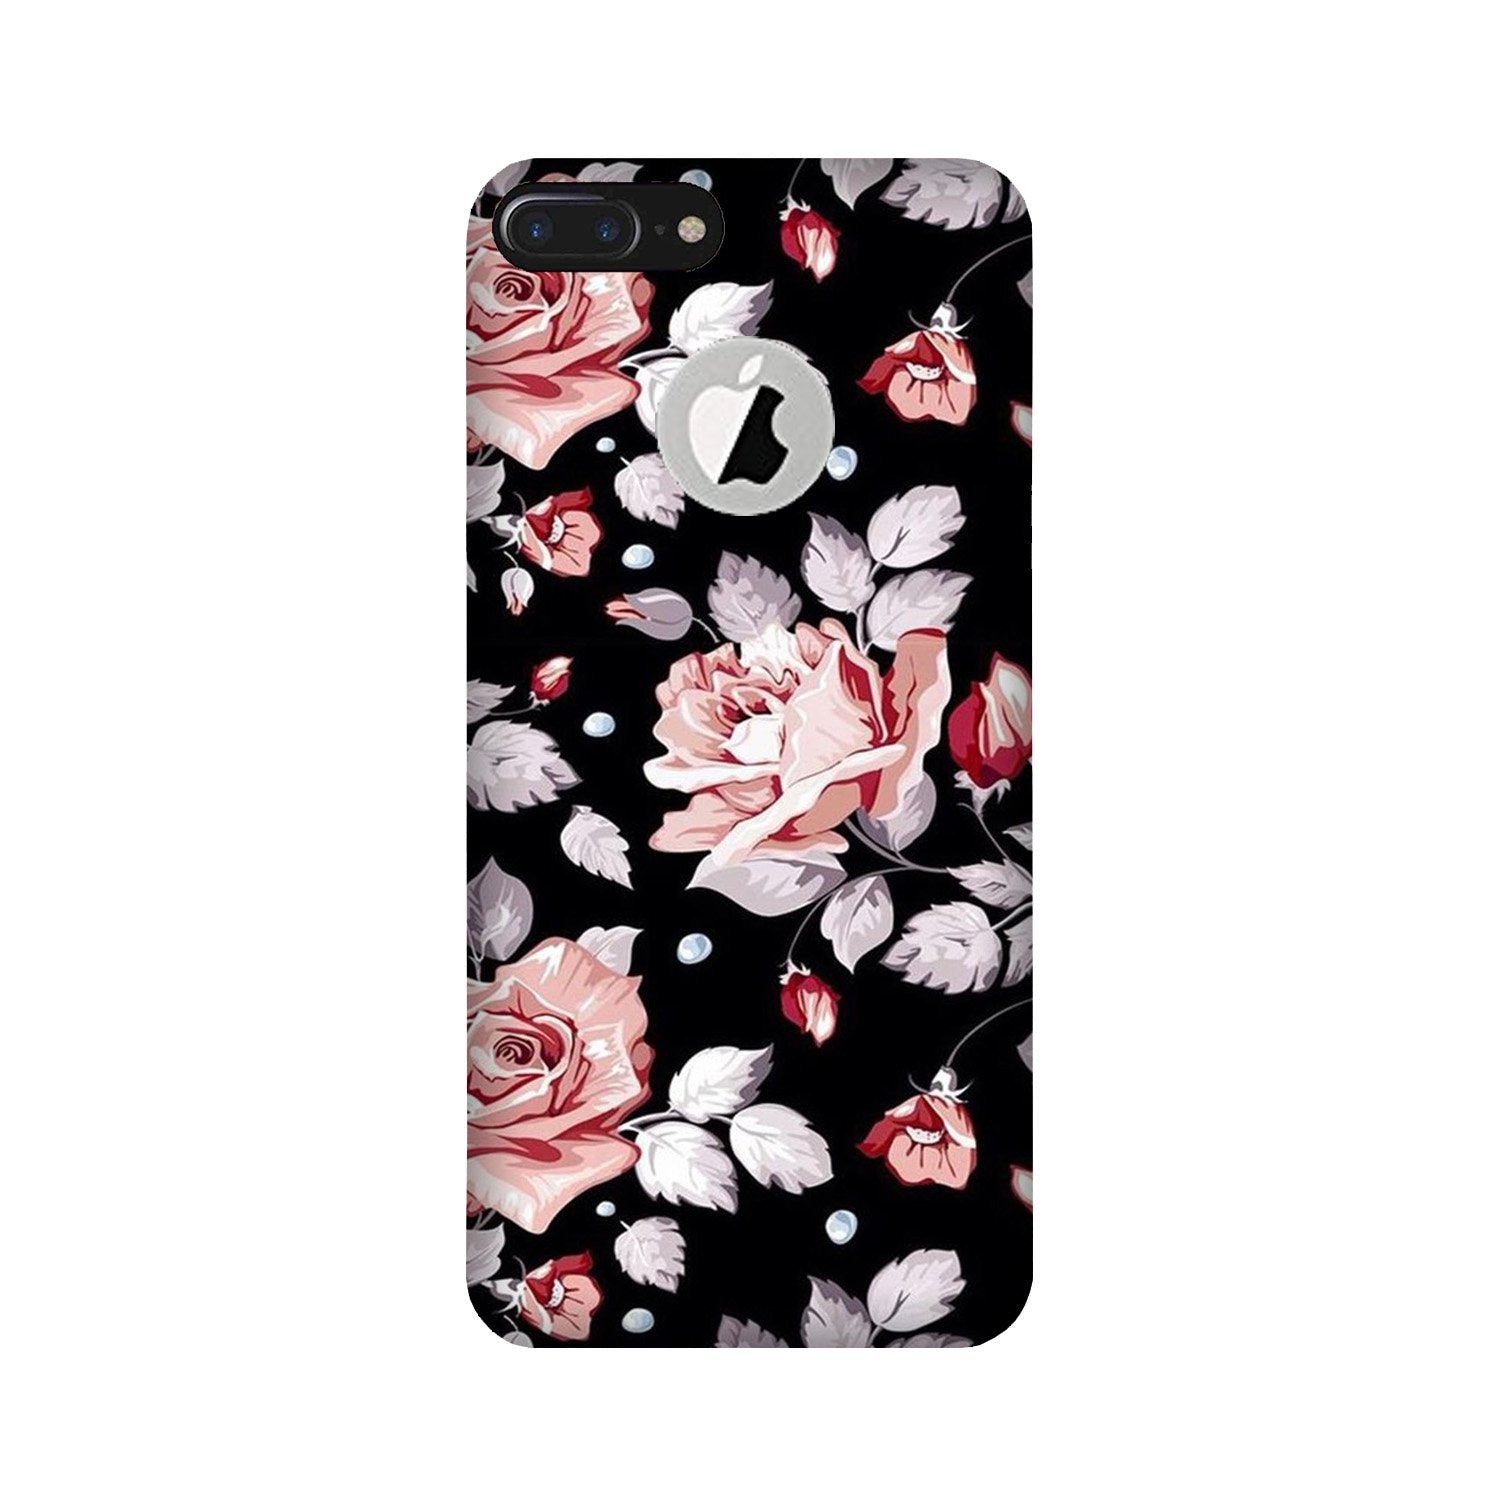 Pink rose Case for iPhone 7 Plus logo cut